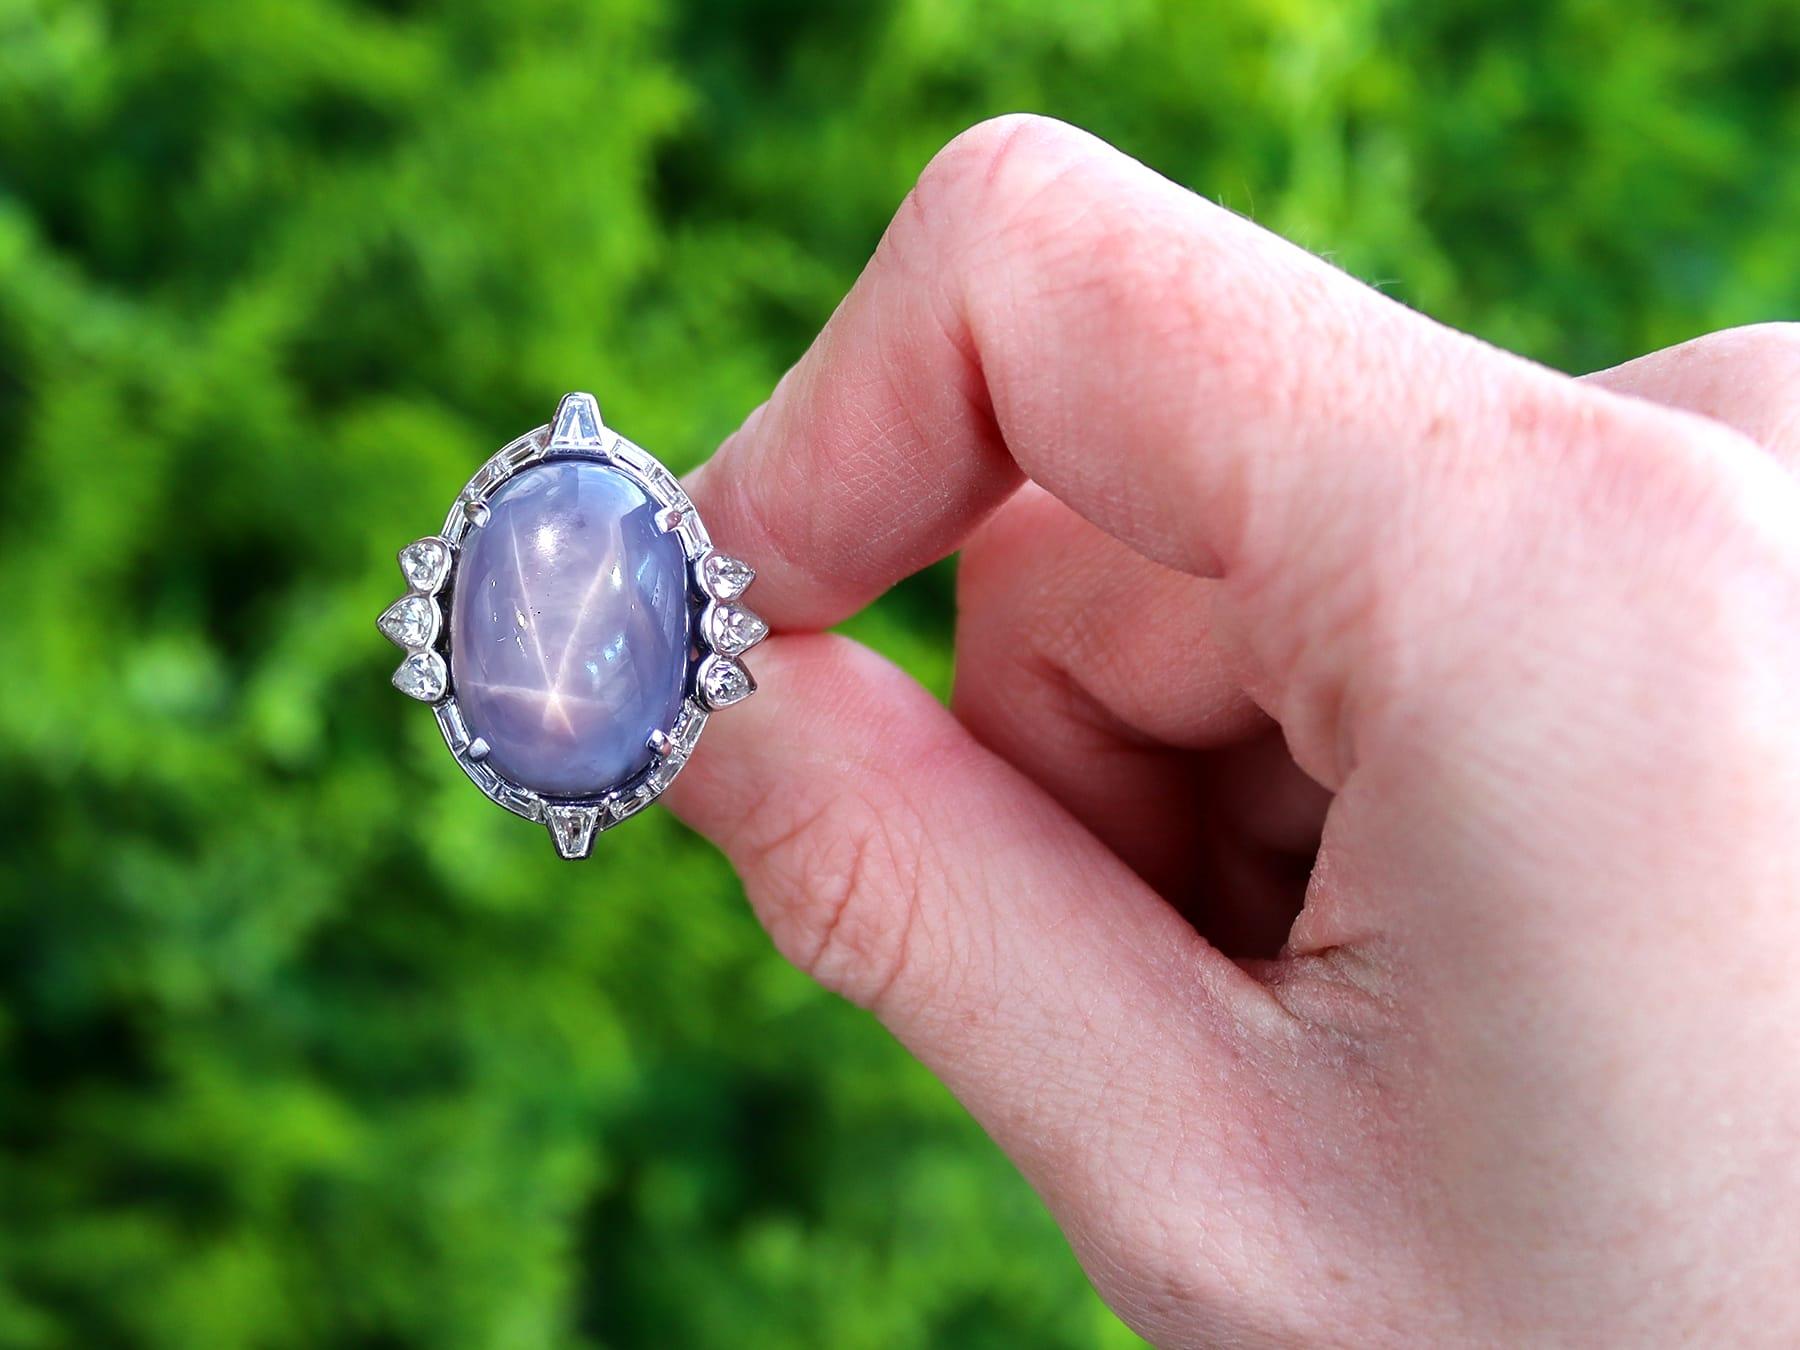 A stunning antique 1950's 28.18 carat star sapphire and 2.76 carat diamond, platinum and white gold set dress ring; part of our diverse antique jewellery and estate jewelry collections

This stunning, fine and impressive vintage sapphire ring has